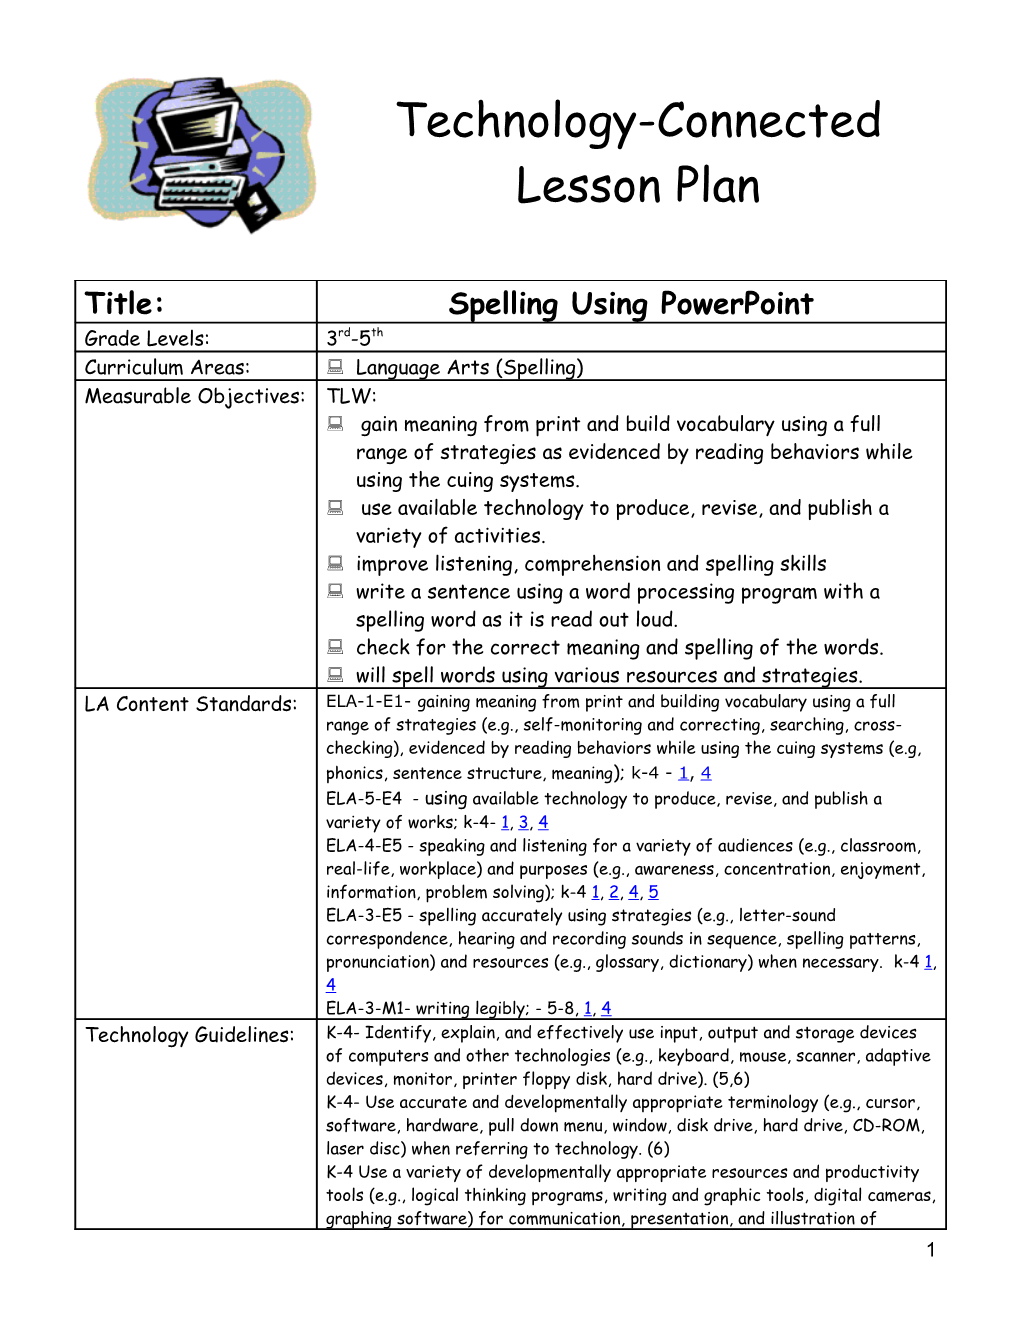 Technology-Connected Lesson Plan s8